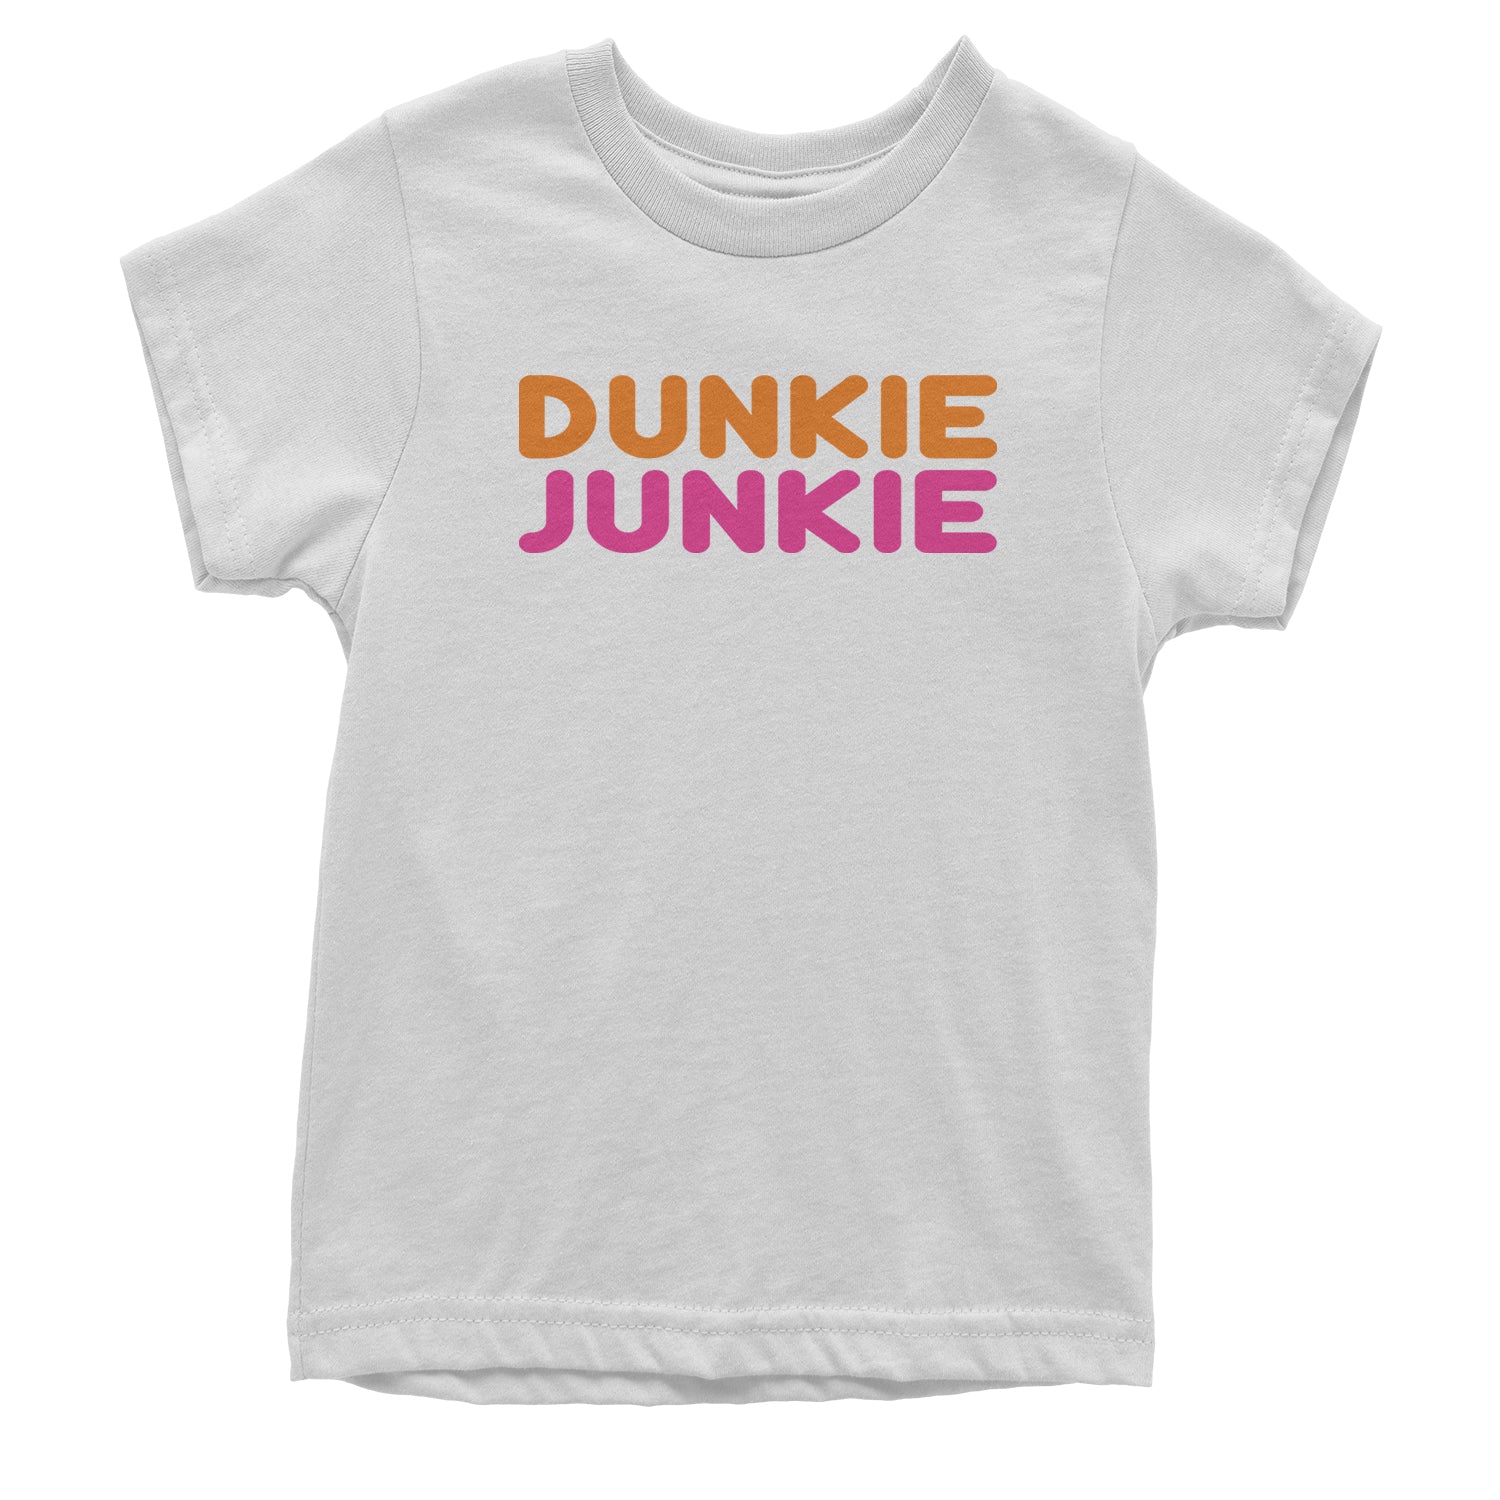 Dunkie Junkie Youth T-shirt addict, capuccino, coffee, dd, dnkn, dunkin, dunking, latte by Expression Tees